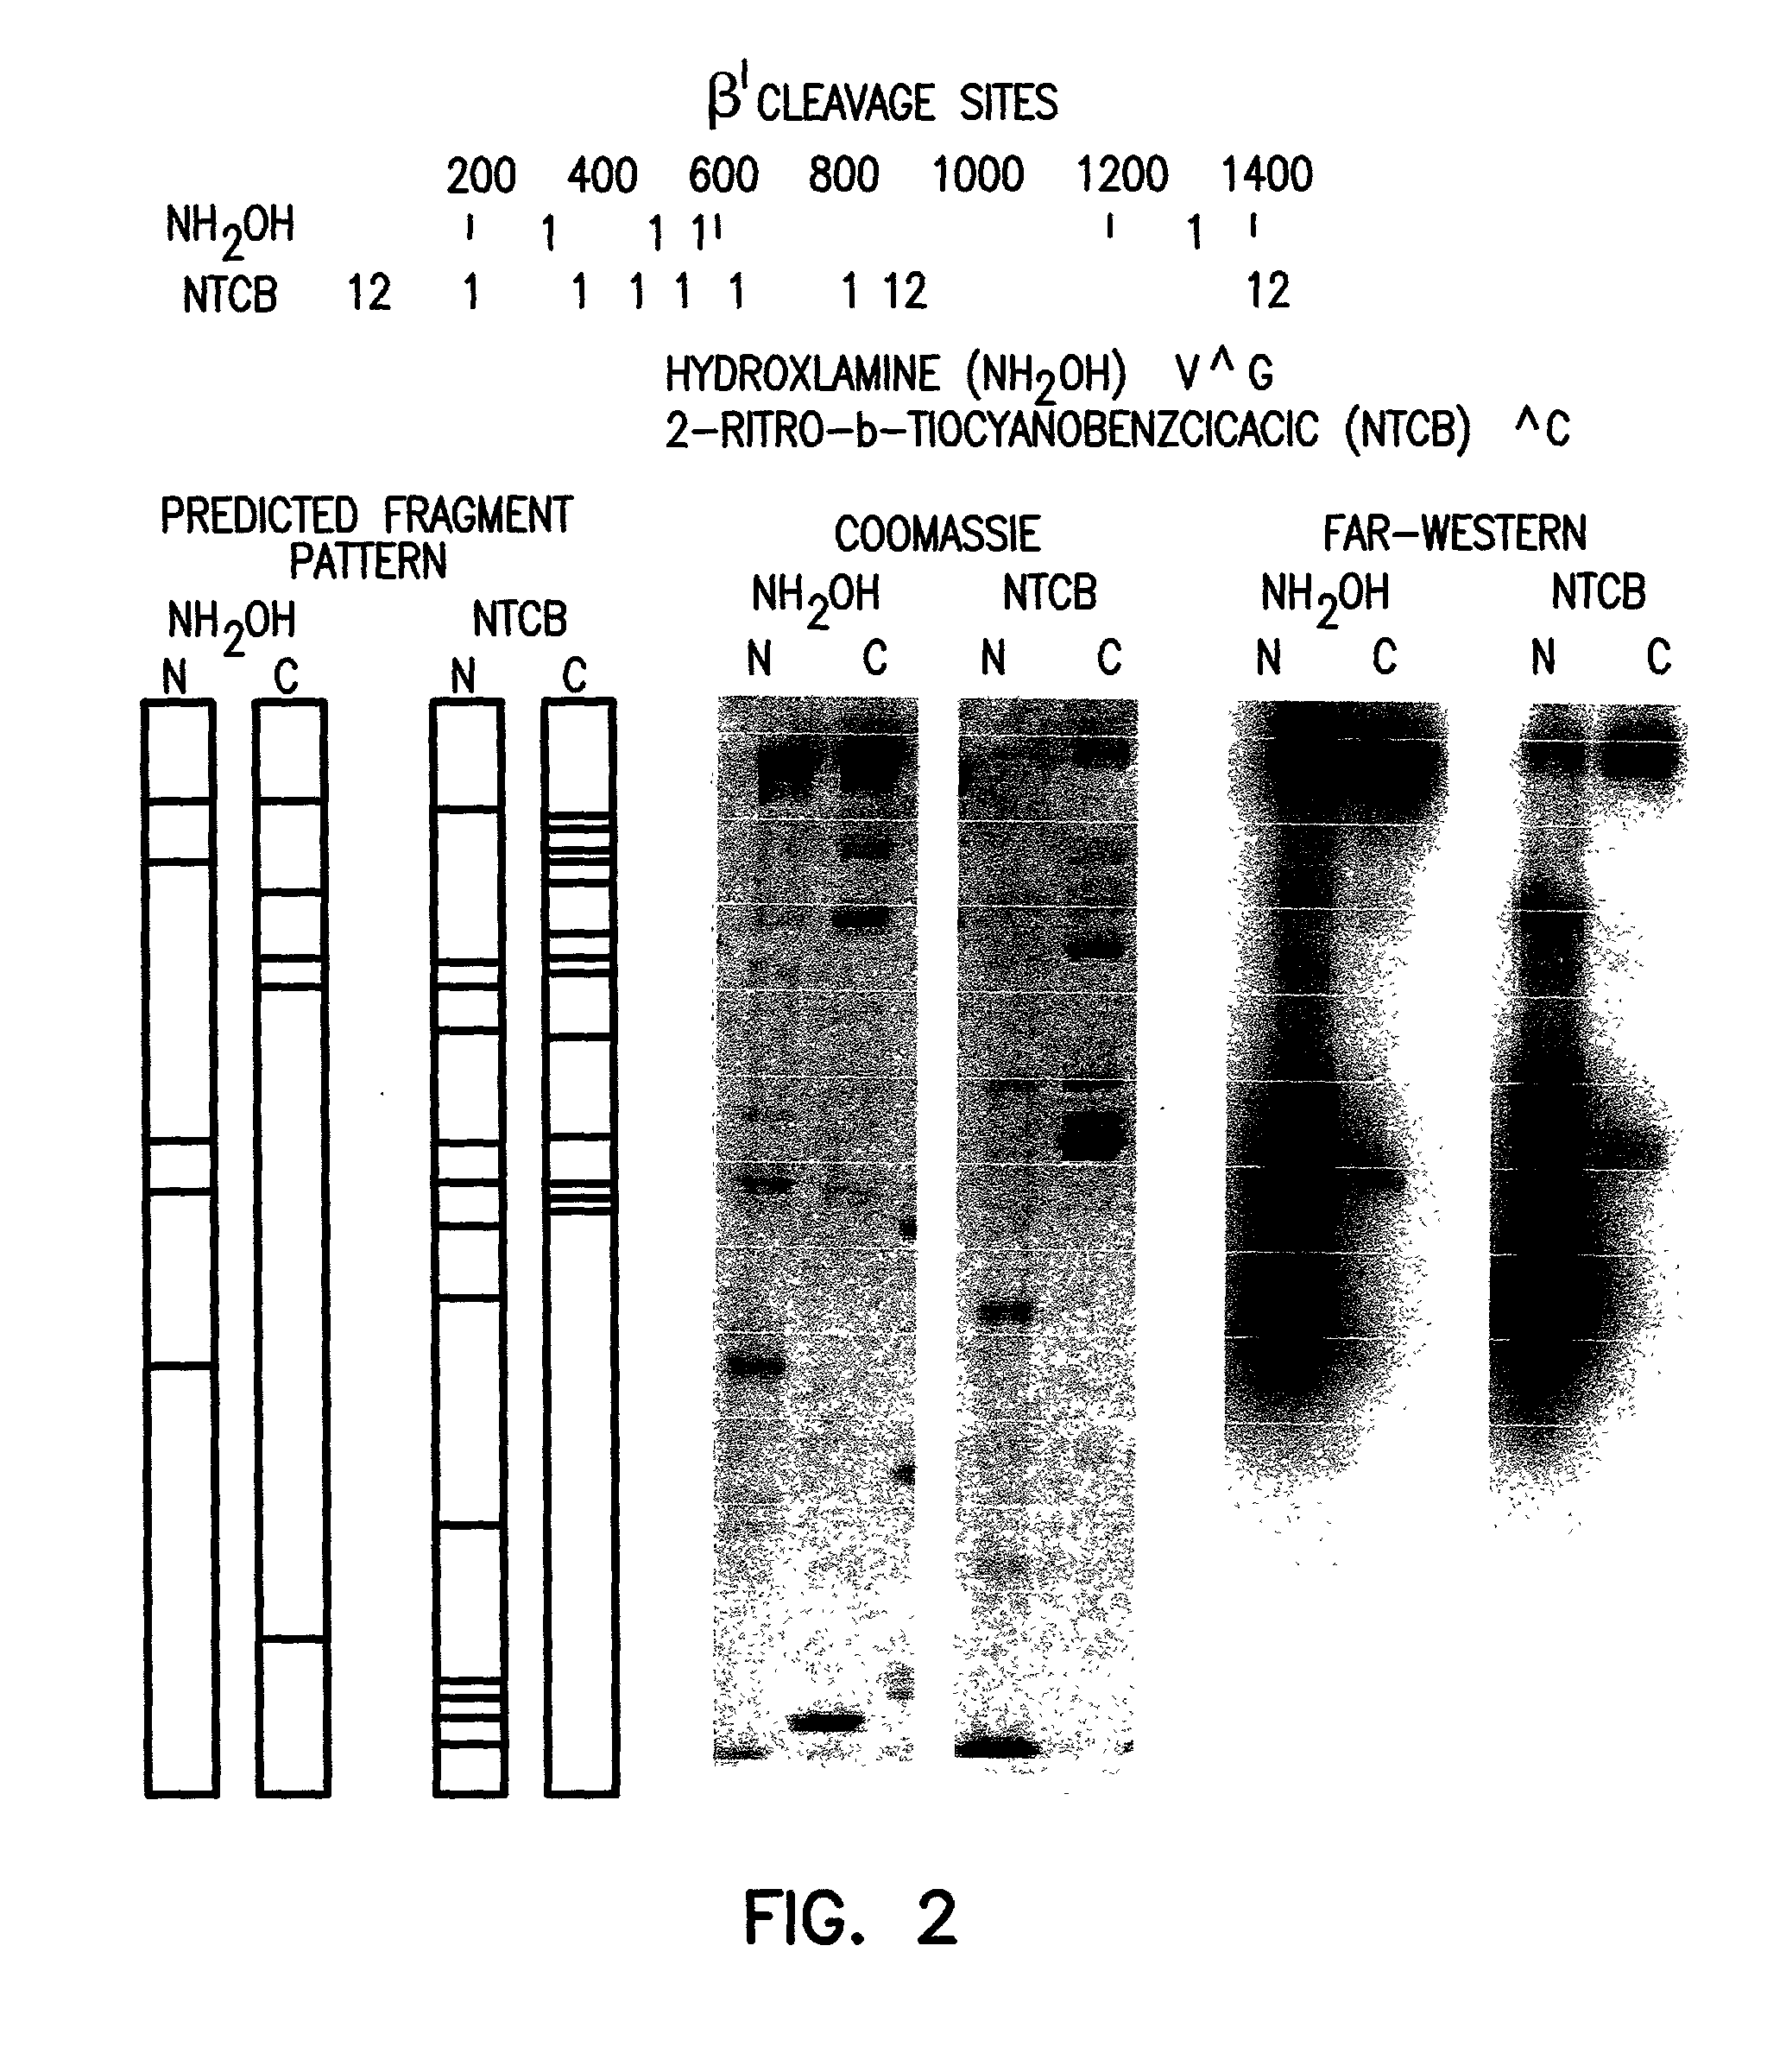 Sigma binding region of RNA polymerase and uses thereof